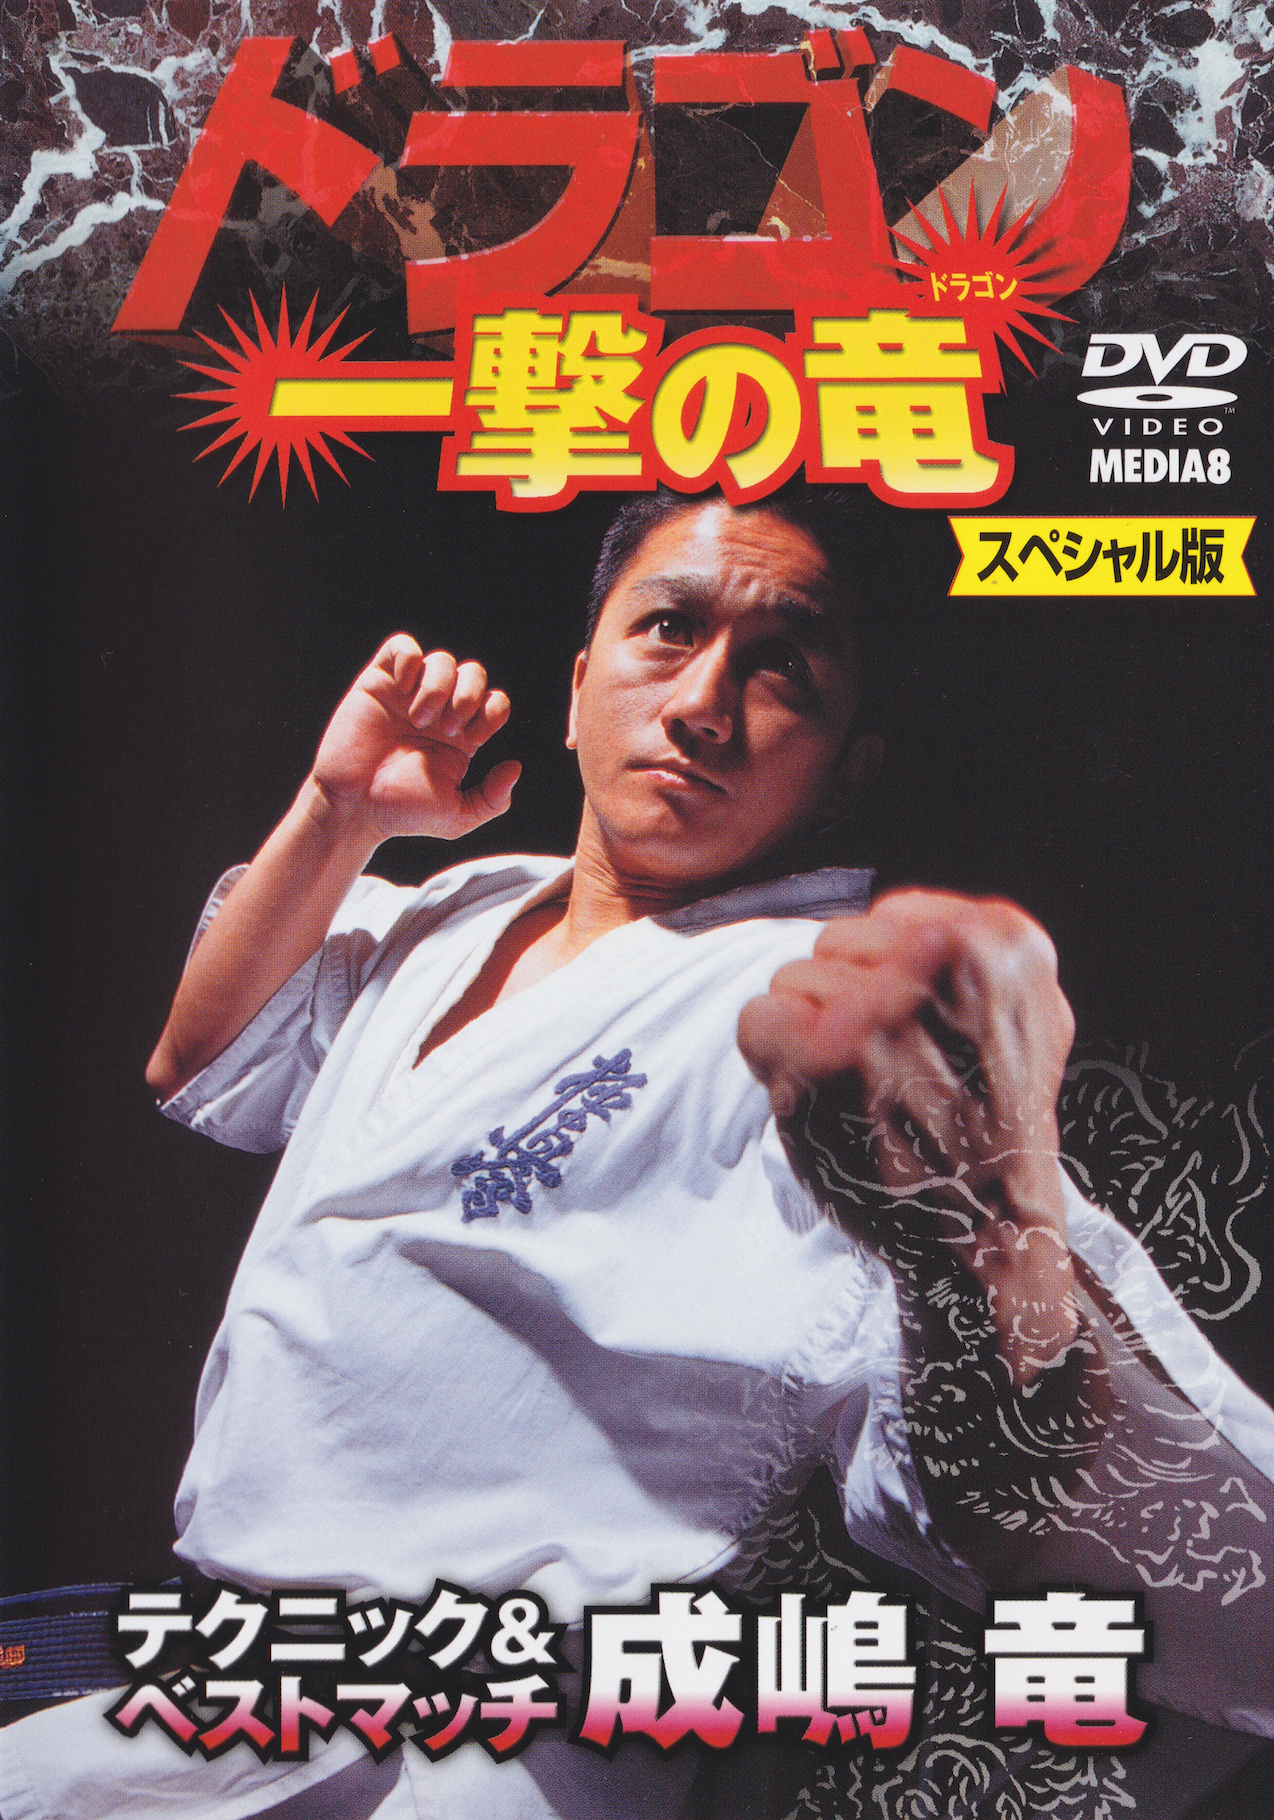 Dragon Knockout Punch by Ryu Narushima DVD (Preowned)